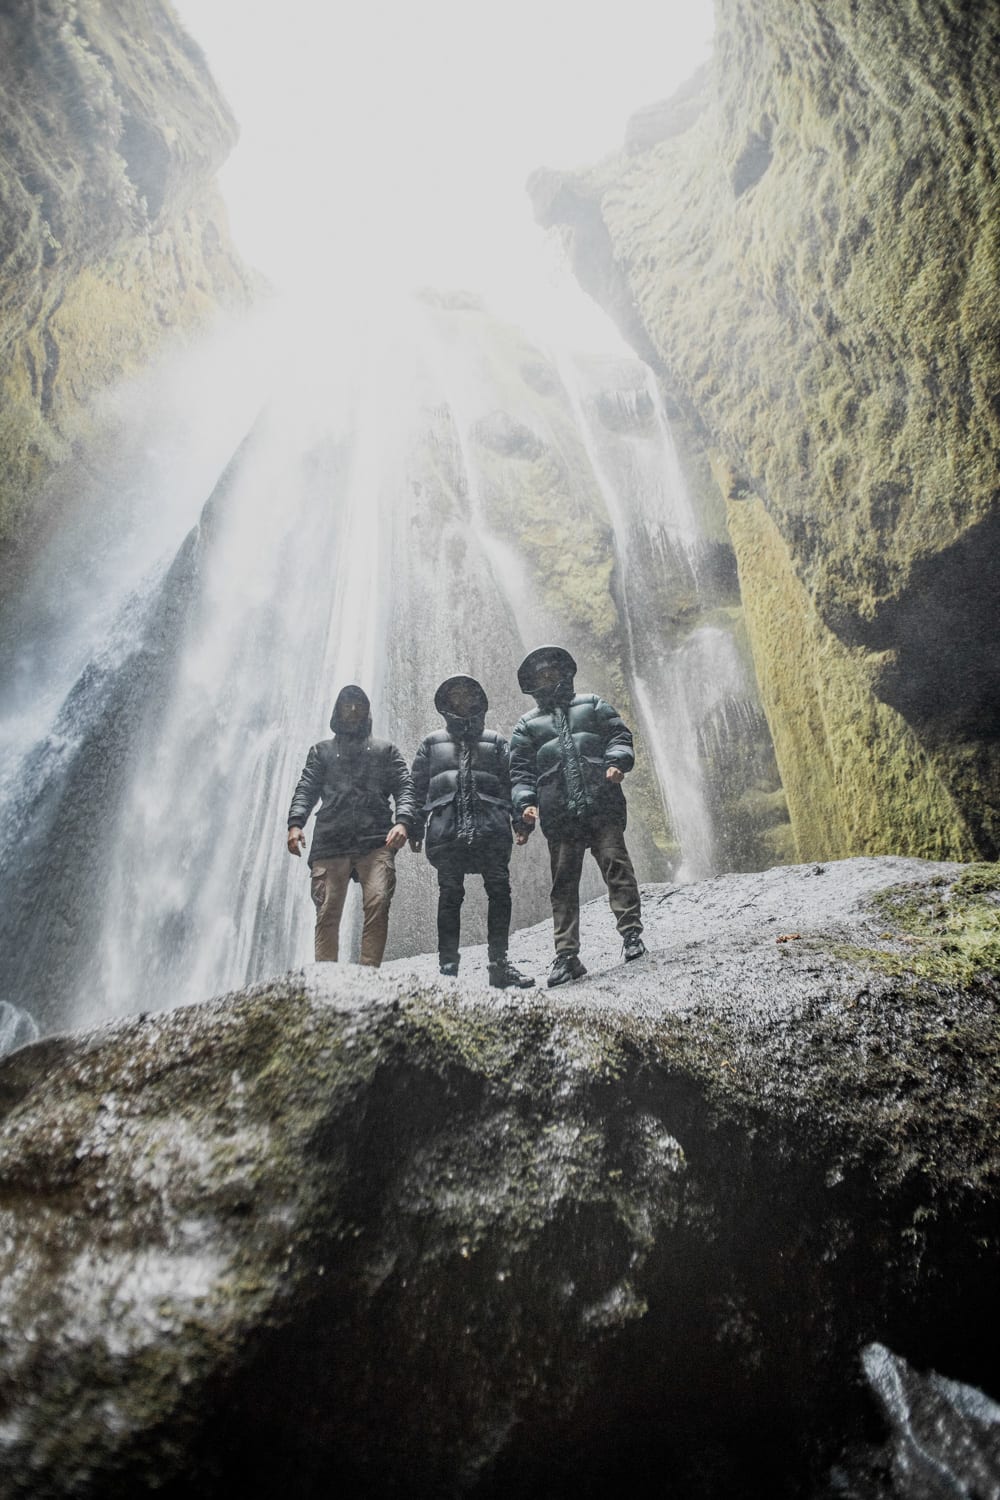 The three members of the Meduza band standing on the rock in front of Gljufrabui waterfall in the South of Iceland looking like they are getting soaked by the waterfall